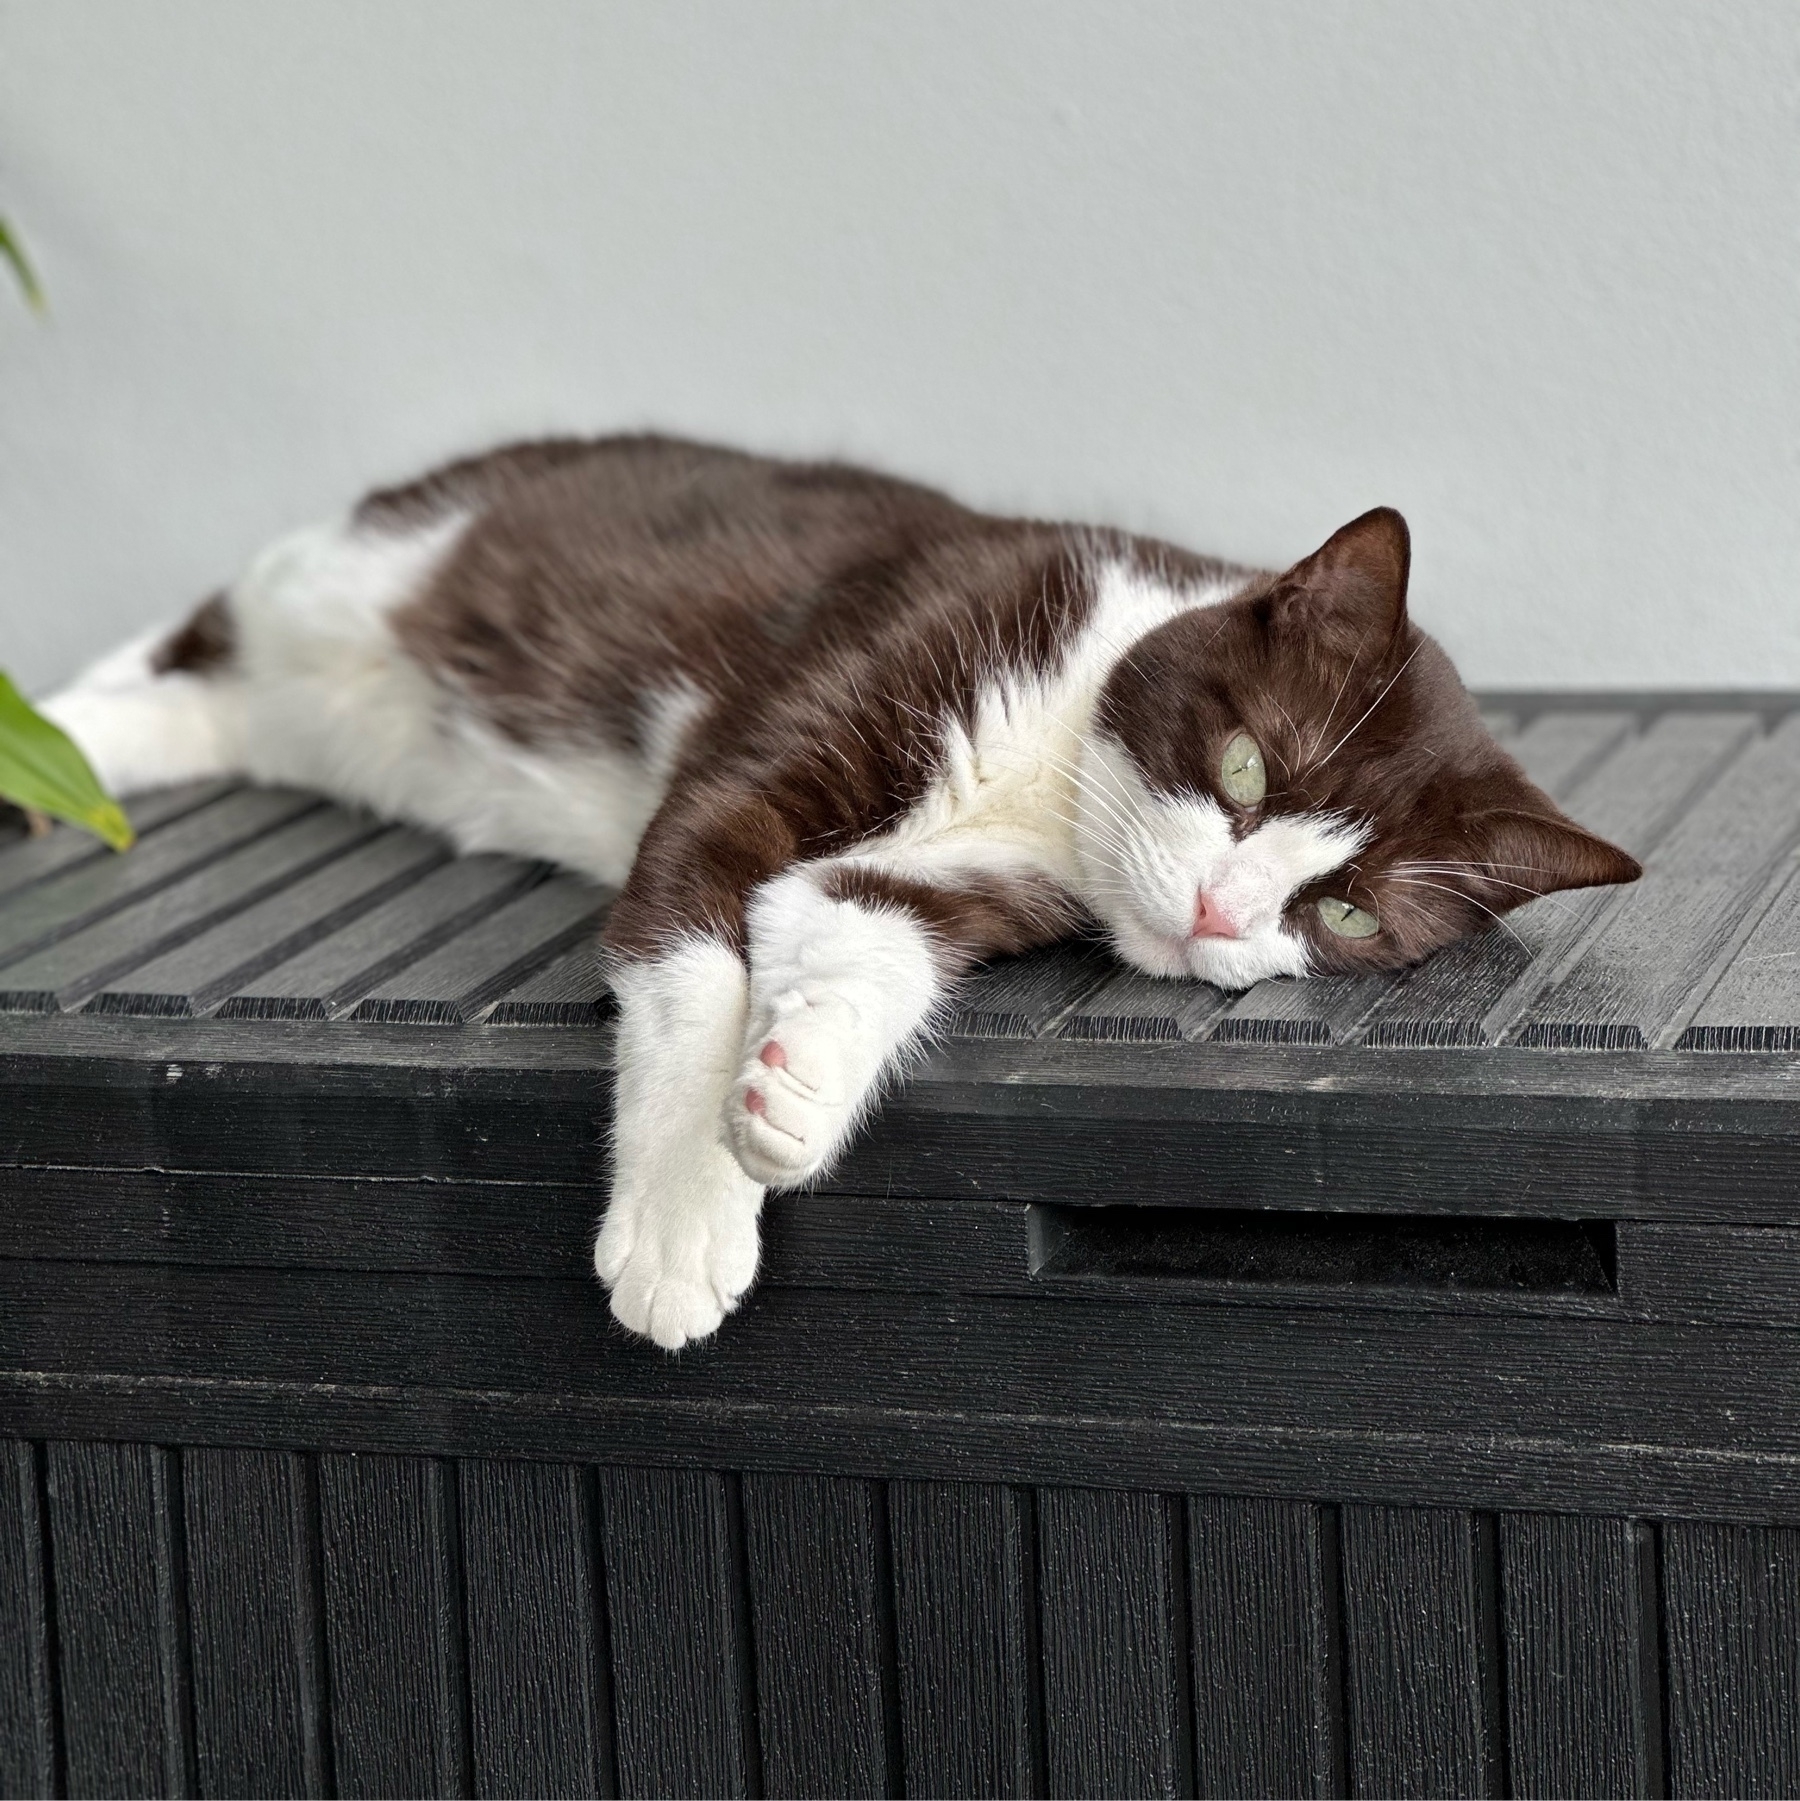 A black and white cat stretched out asleep on a large black box. Her front paws are crossed and hanging over the edge of the box.